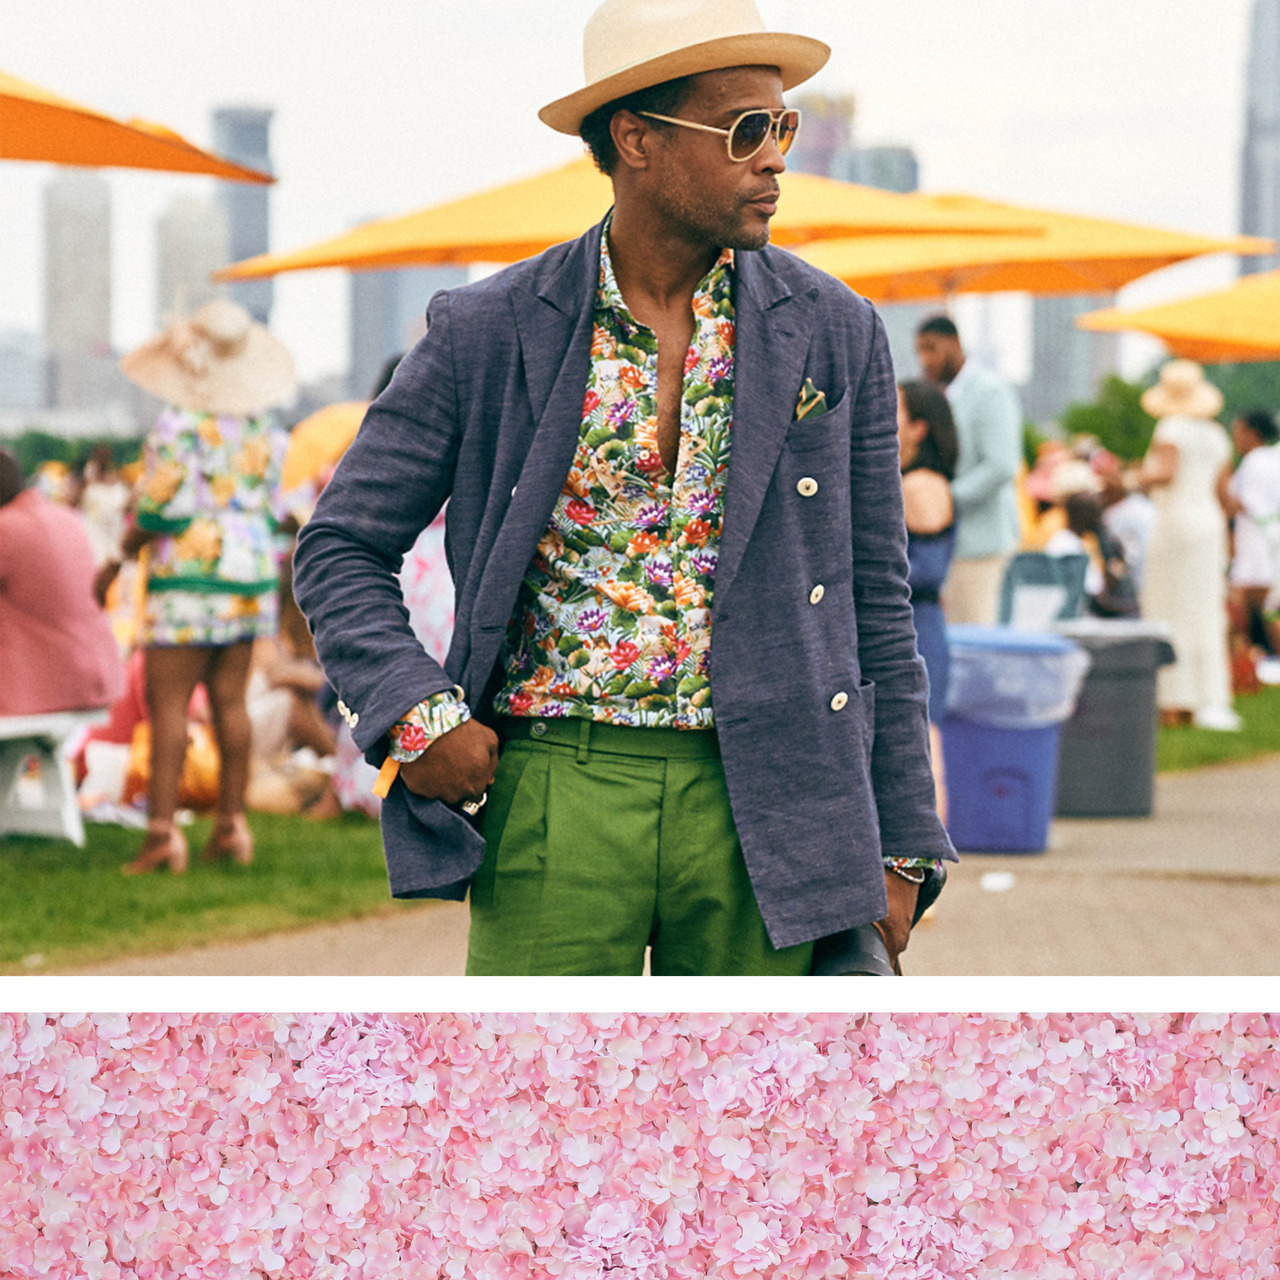 ClicquotStyle at The Sixth Annual Veuve Clicquot Polo Classic, Los Angeles  #VCPoloClassic